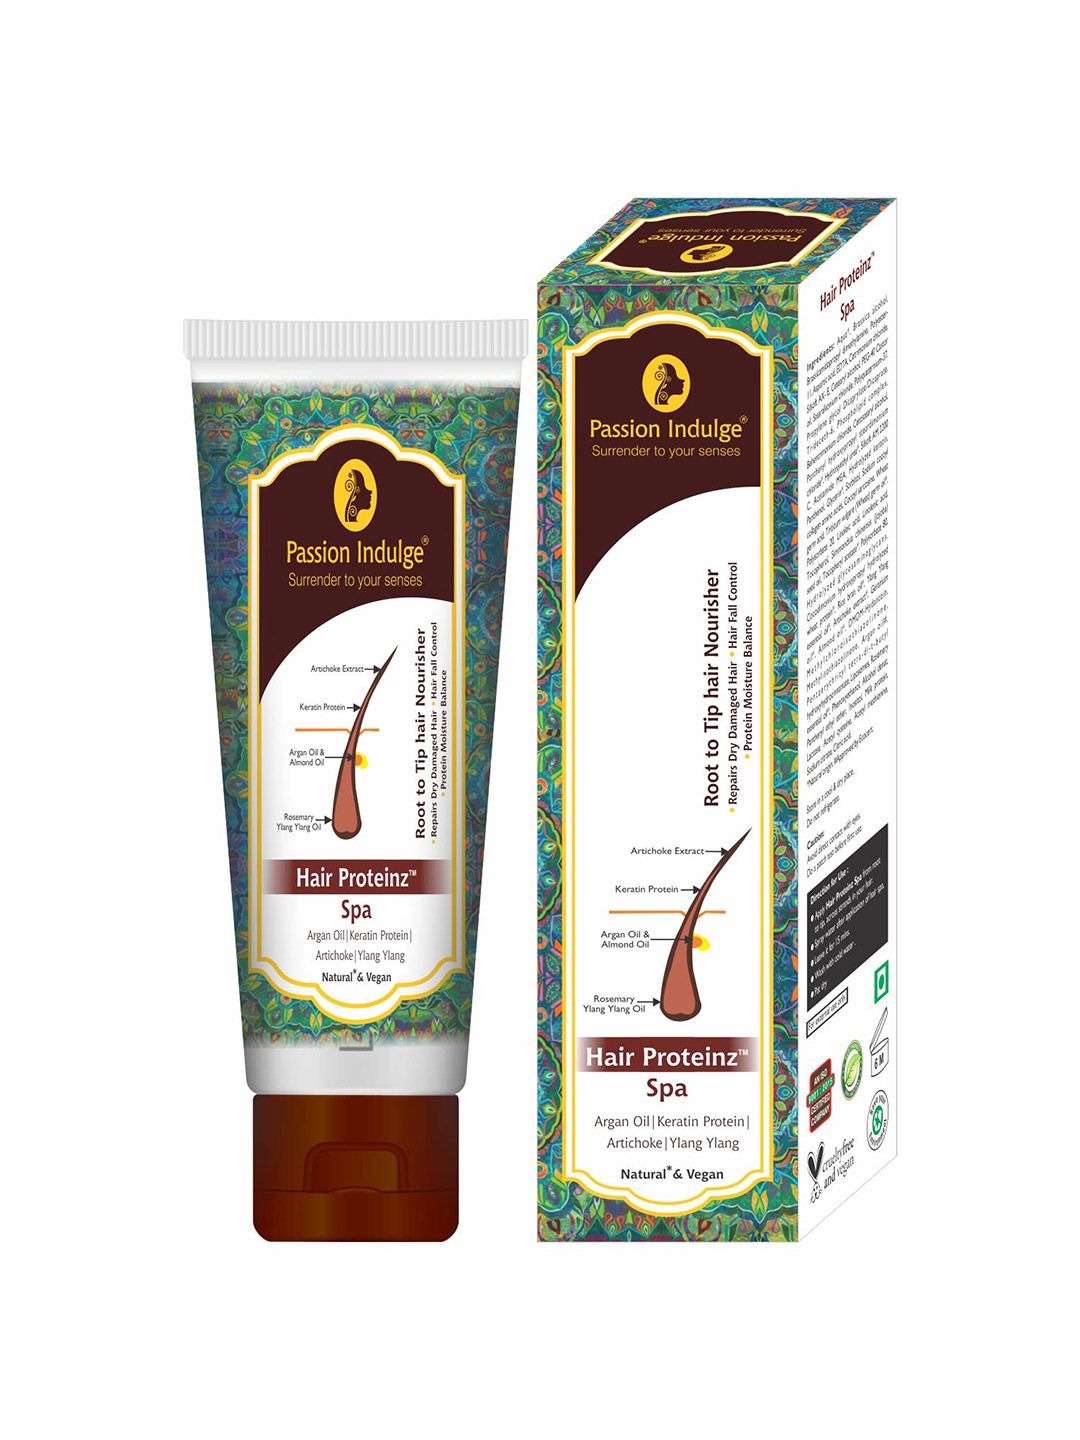 Passion Indulge Hair Proteinz Spa Inbuilt Protien Booster Cream with Argan Oil - 100 g Price in India